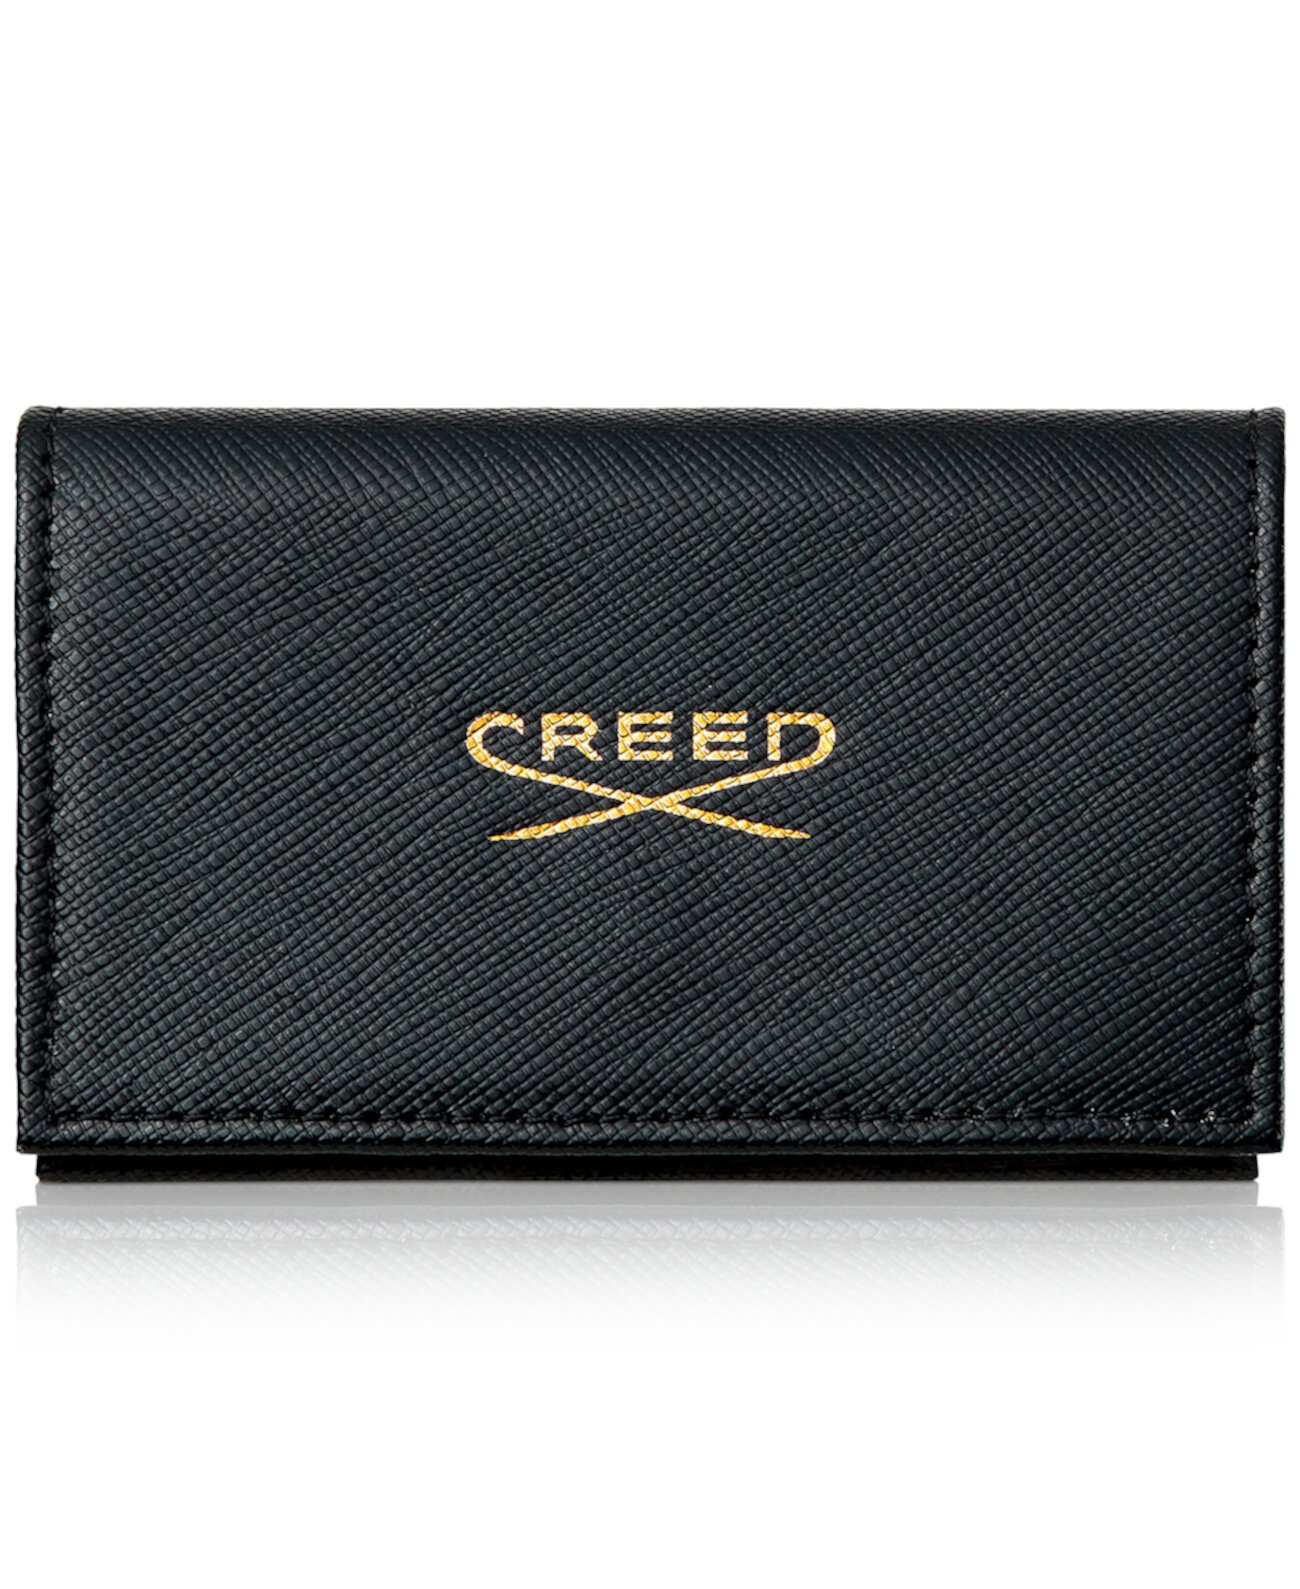 Men's 9-Pc. Black Leather Wallet Gift Set Creed